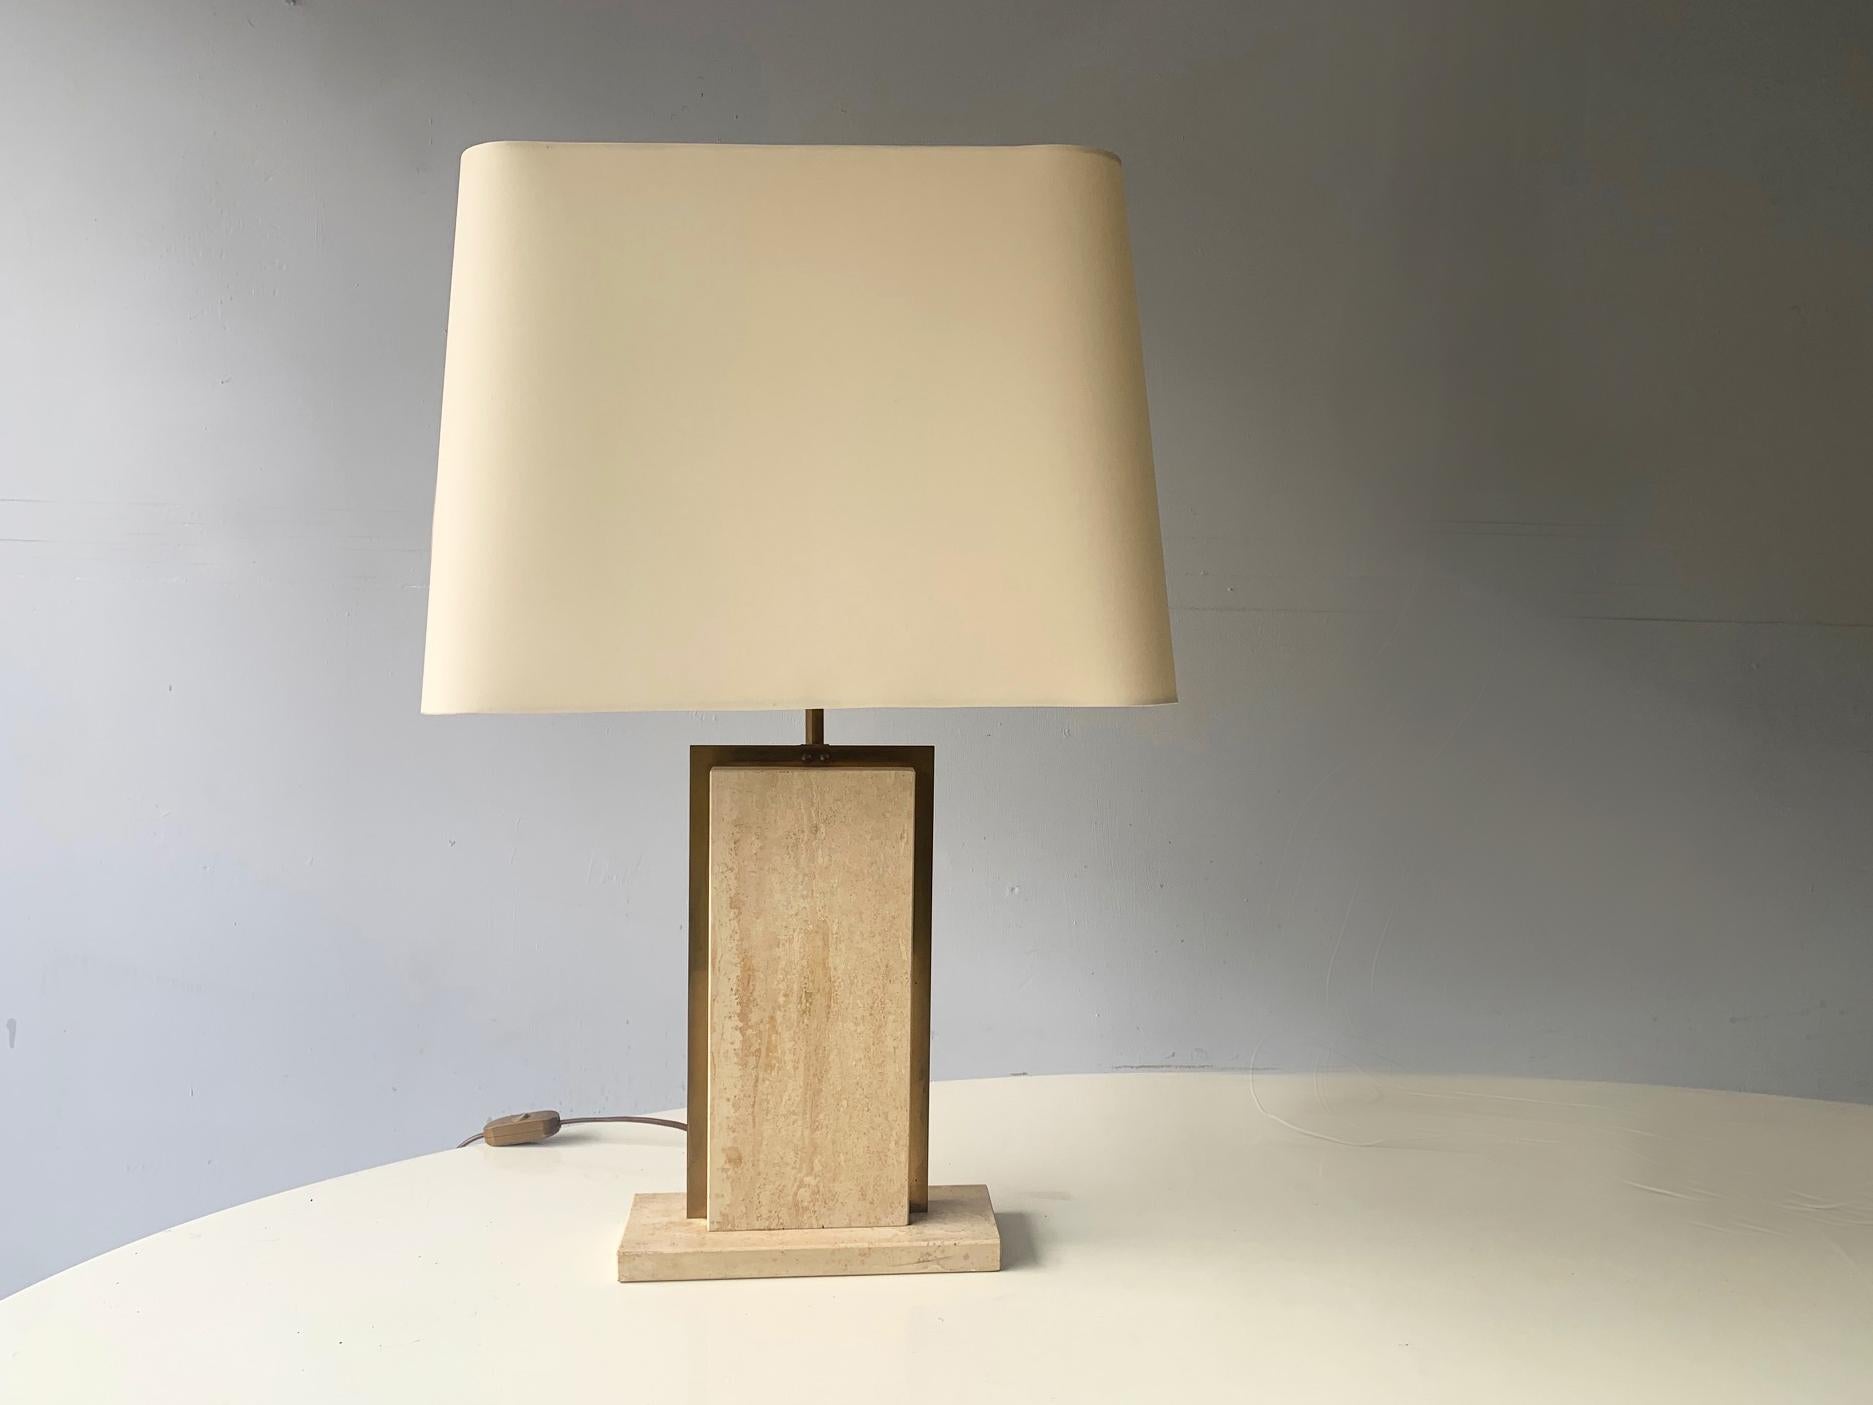 A French table lamp produced in the 1960s with solid travertine marble and inlaid gilt metal. The shade frame is original, and a new shade has been made to fit, with near identical material. There is a small mark on the shade, please see photos for